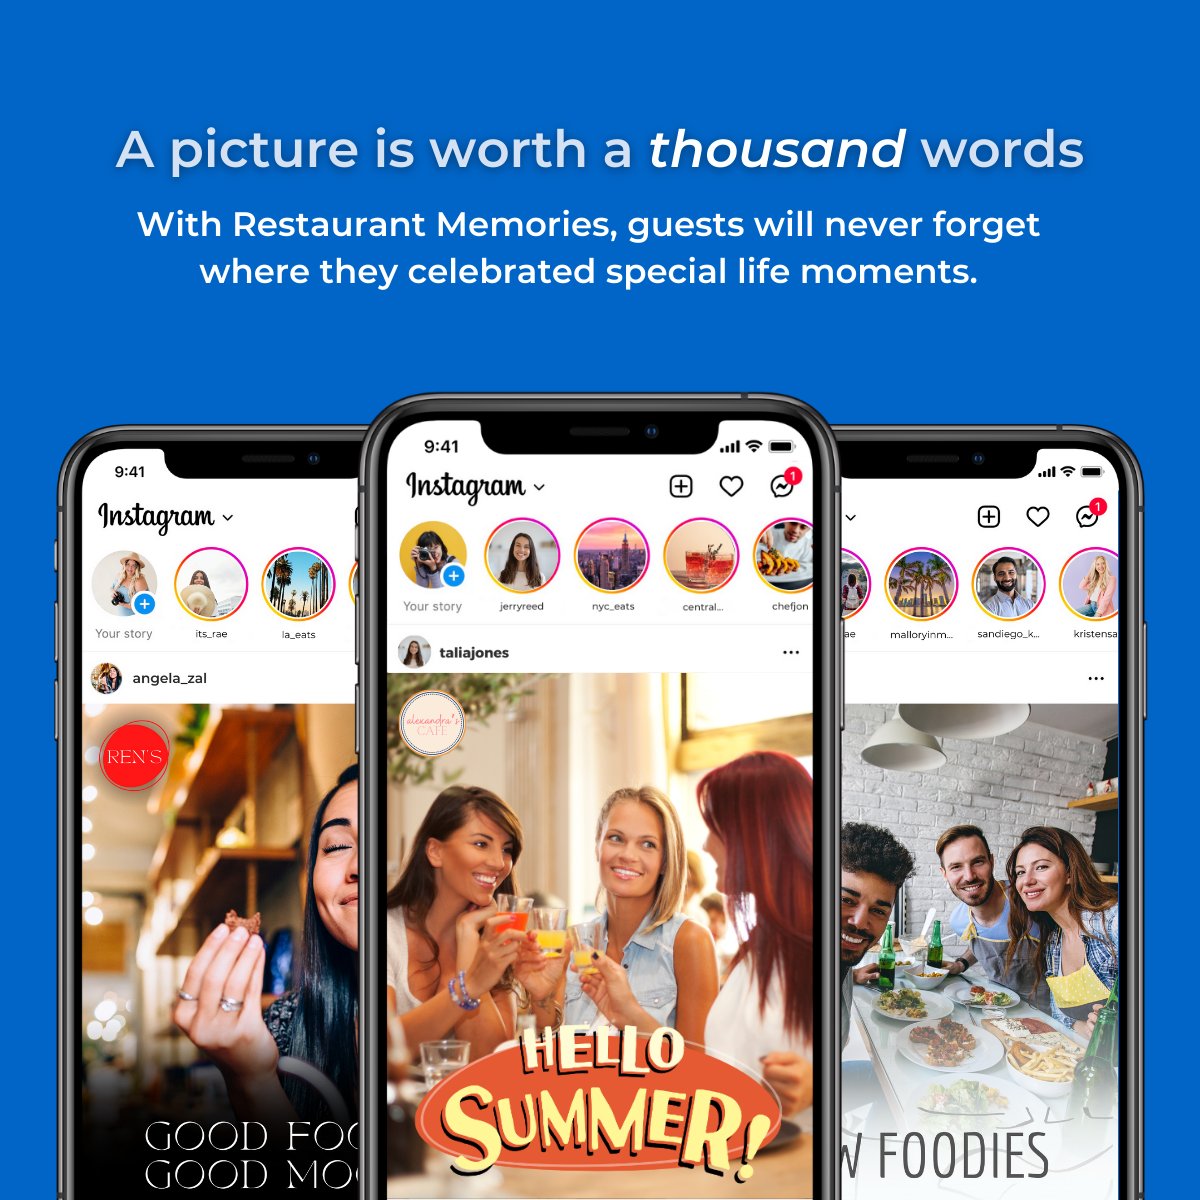 Never let guests miss a moment at your restaurant! Create special memories and gain user-generated content with Restaurant Memories: vist.ly/33c3j 

#FoodAndBeverage #QRCode #HospitalityIndustry #Restaurants #Innovation #RedefineHospitality #Sustainability #Trending